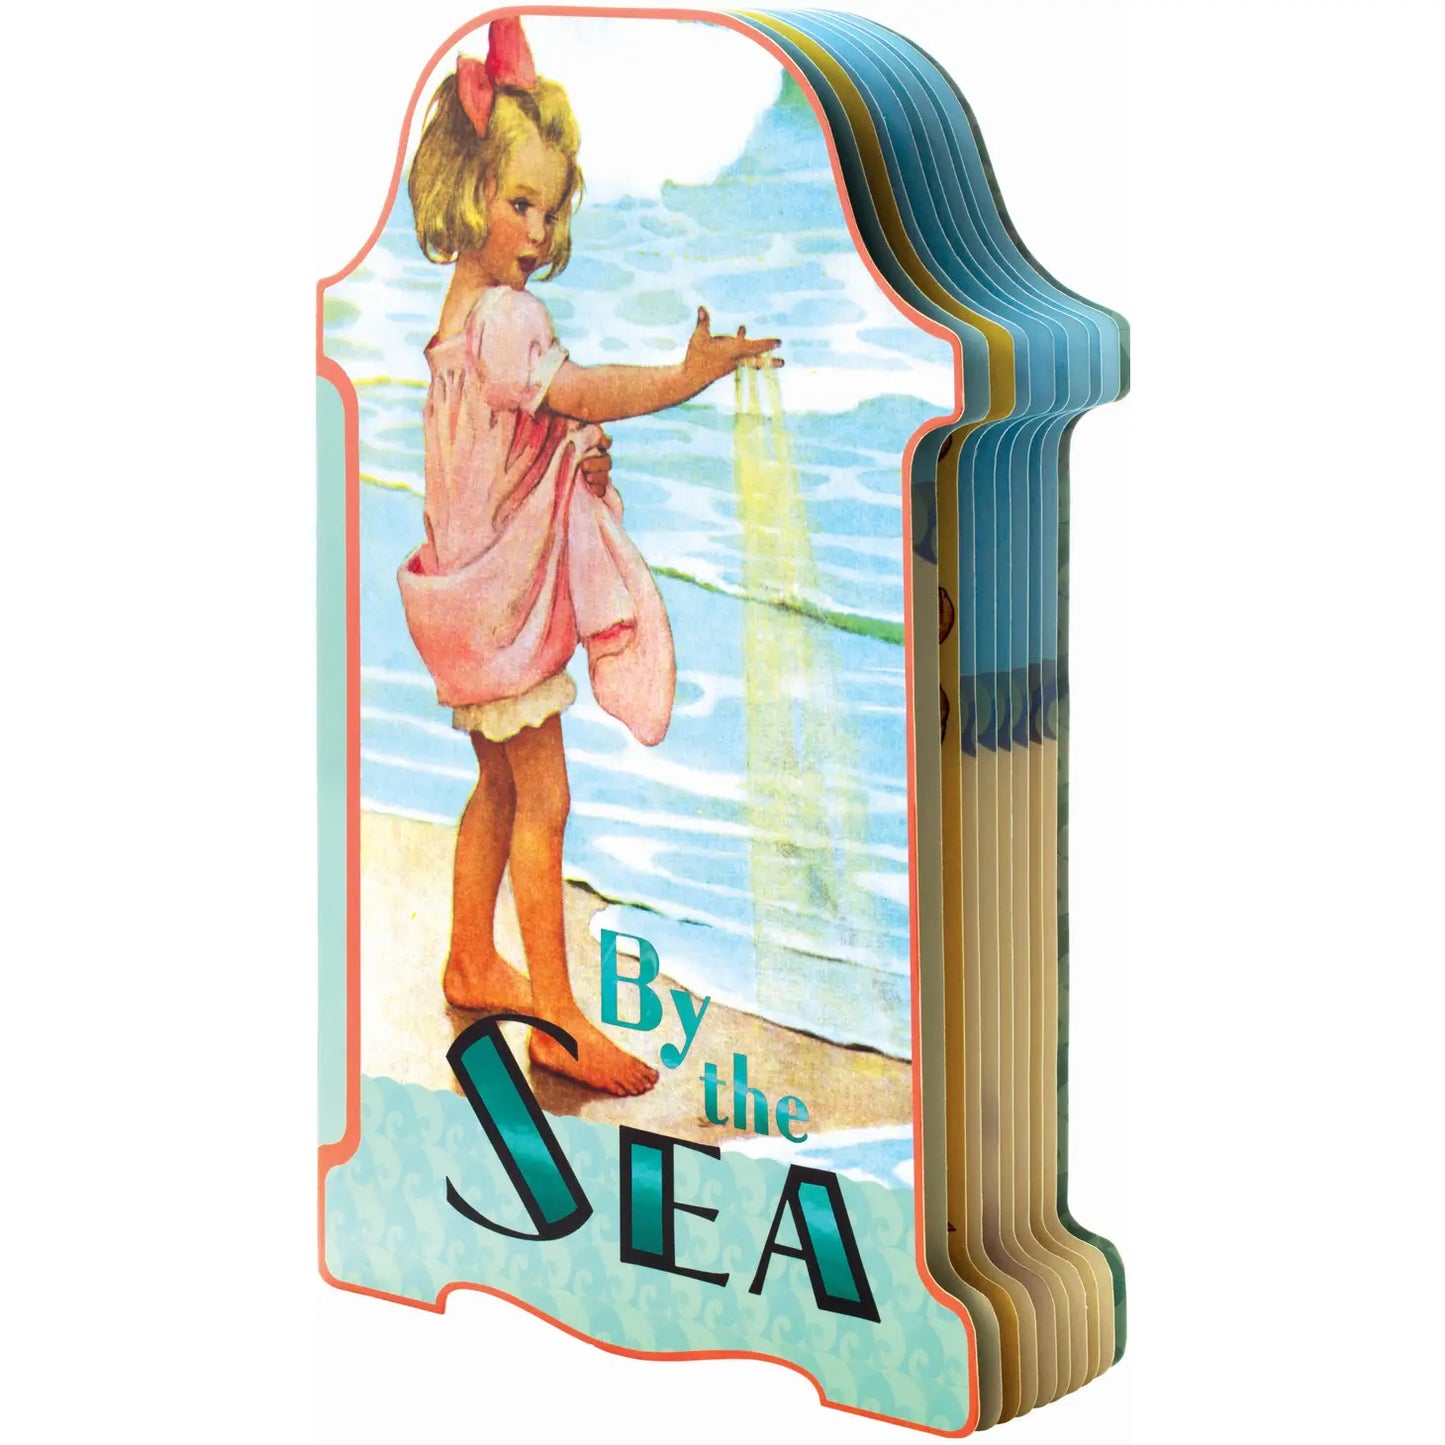 By the Sea - Vintage Children's Picture Book